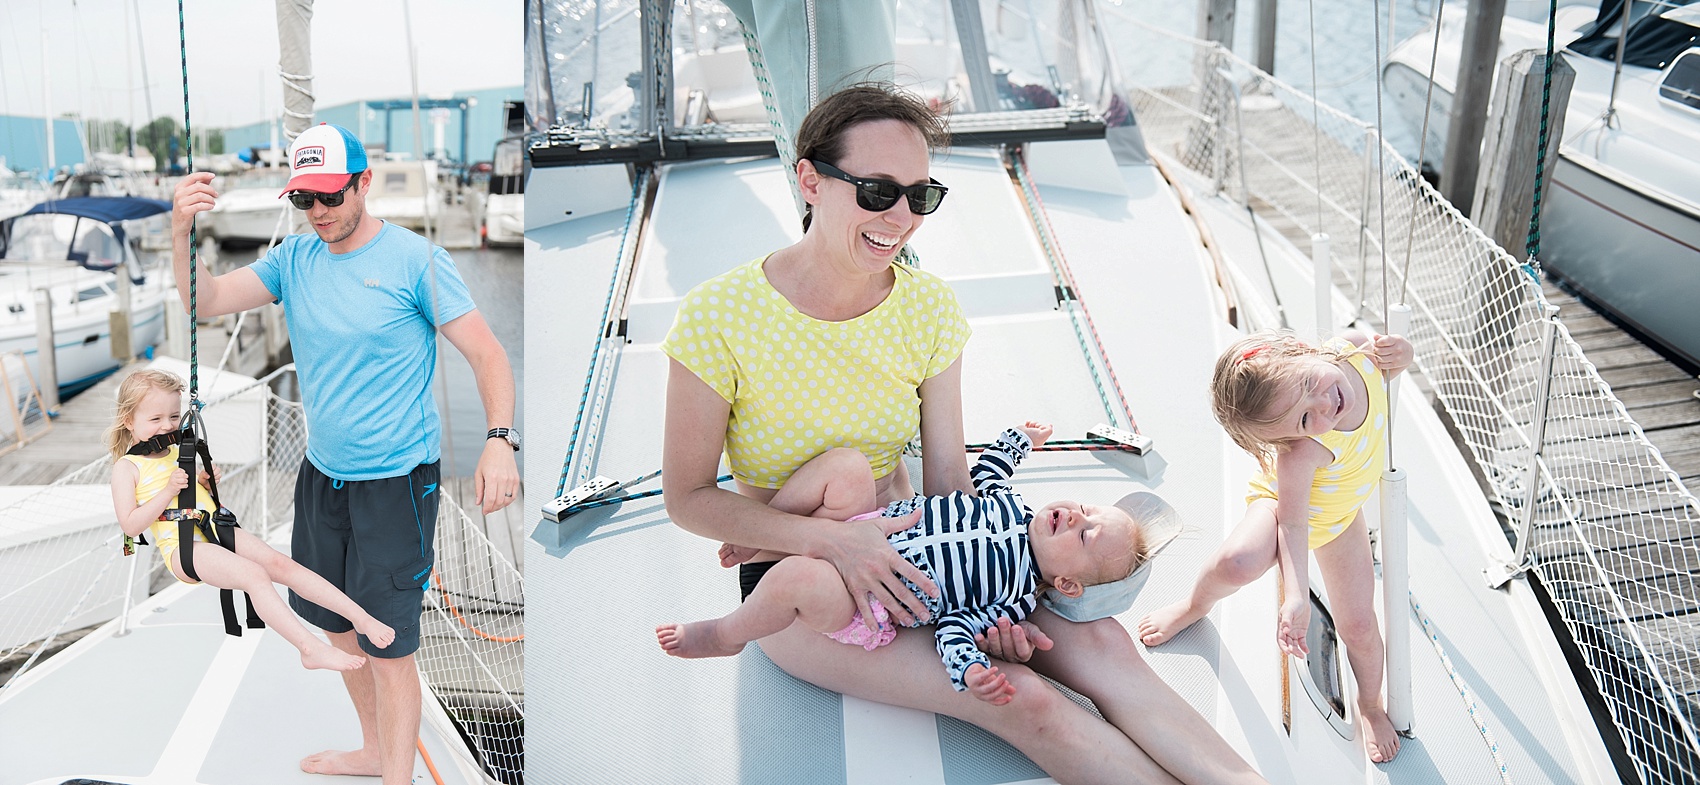 Michigan wedding and lifestyle photographer, Allie Siarto, shares photos of her young daughters playing on the deck of a Catalina 30 sailboat in Muskegon 